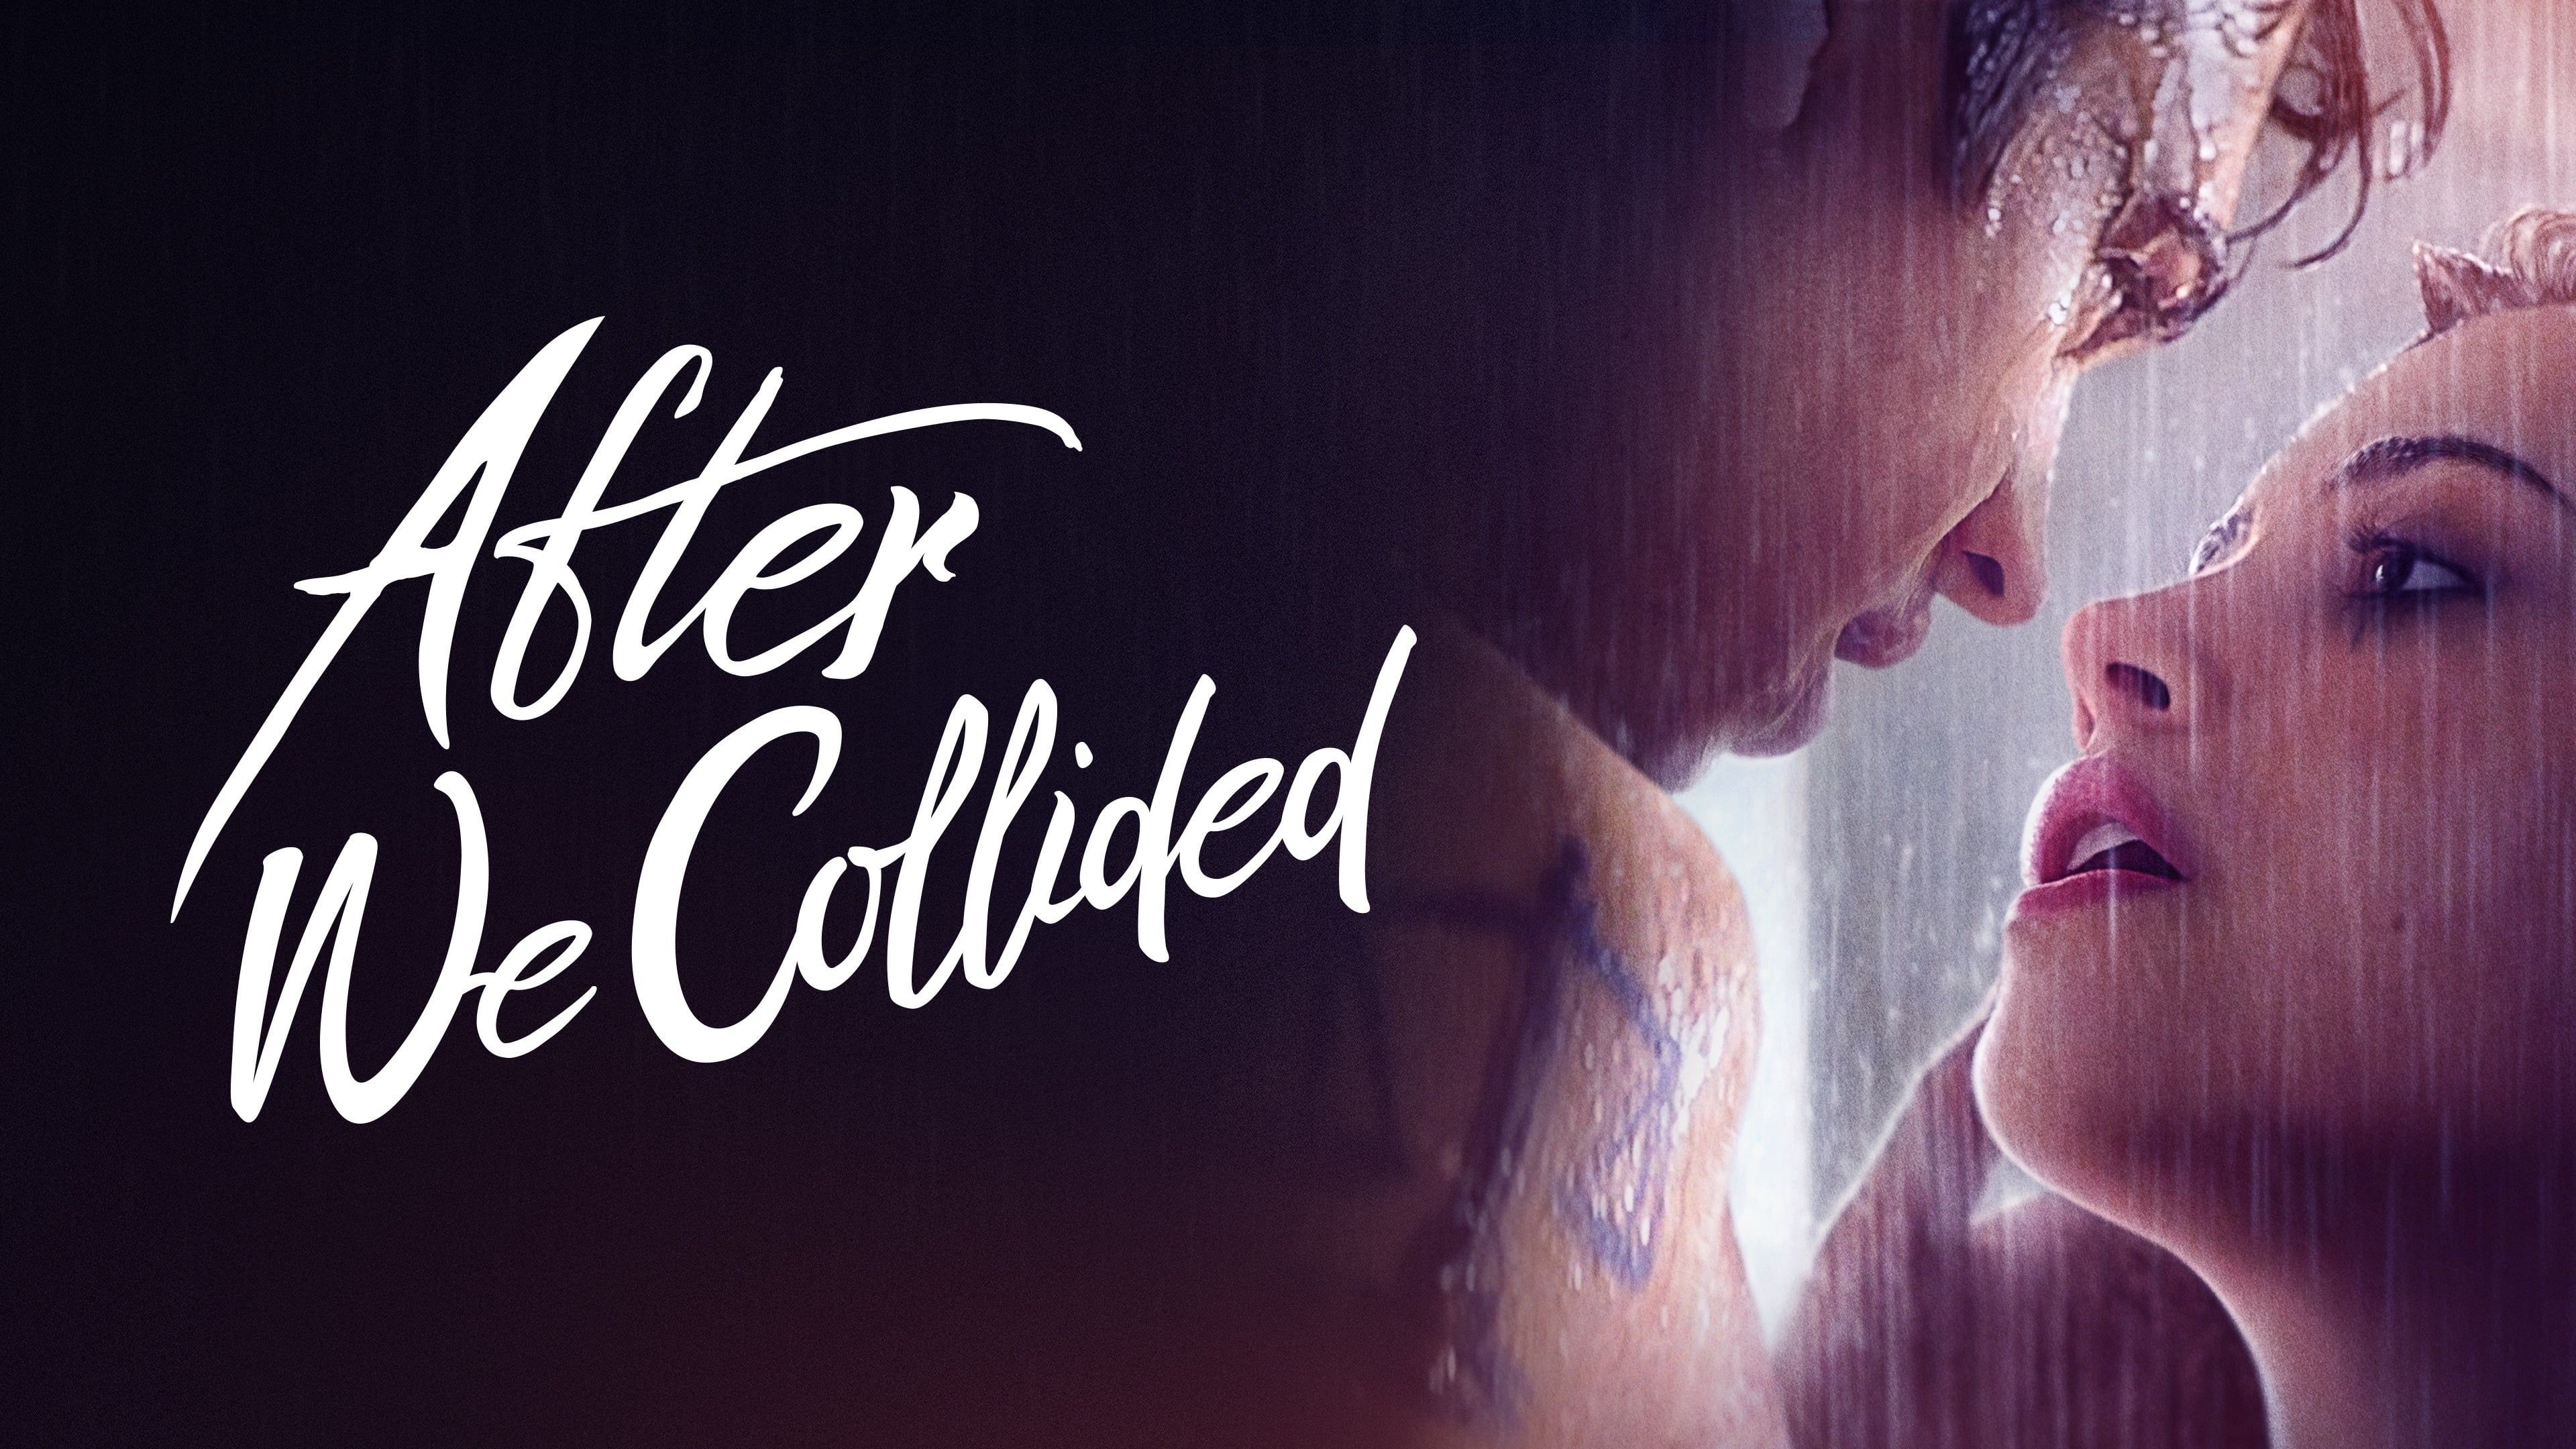 After We Collided: A 2020 American romantic drama film directed by Roger Kumble. 3840x2160 4K Wallpaper.